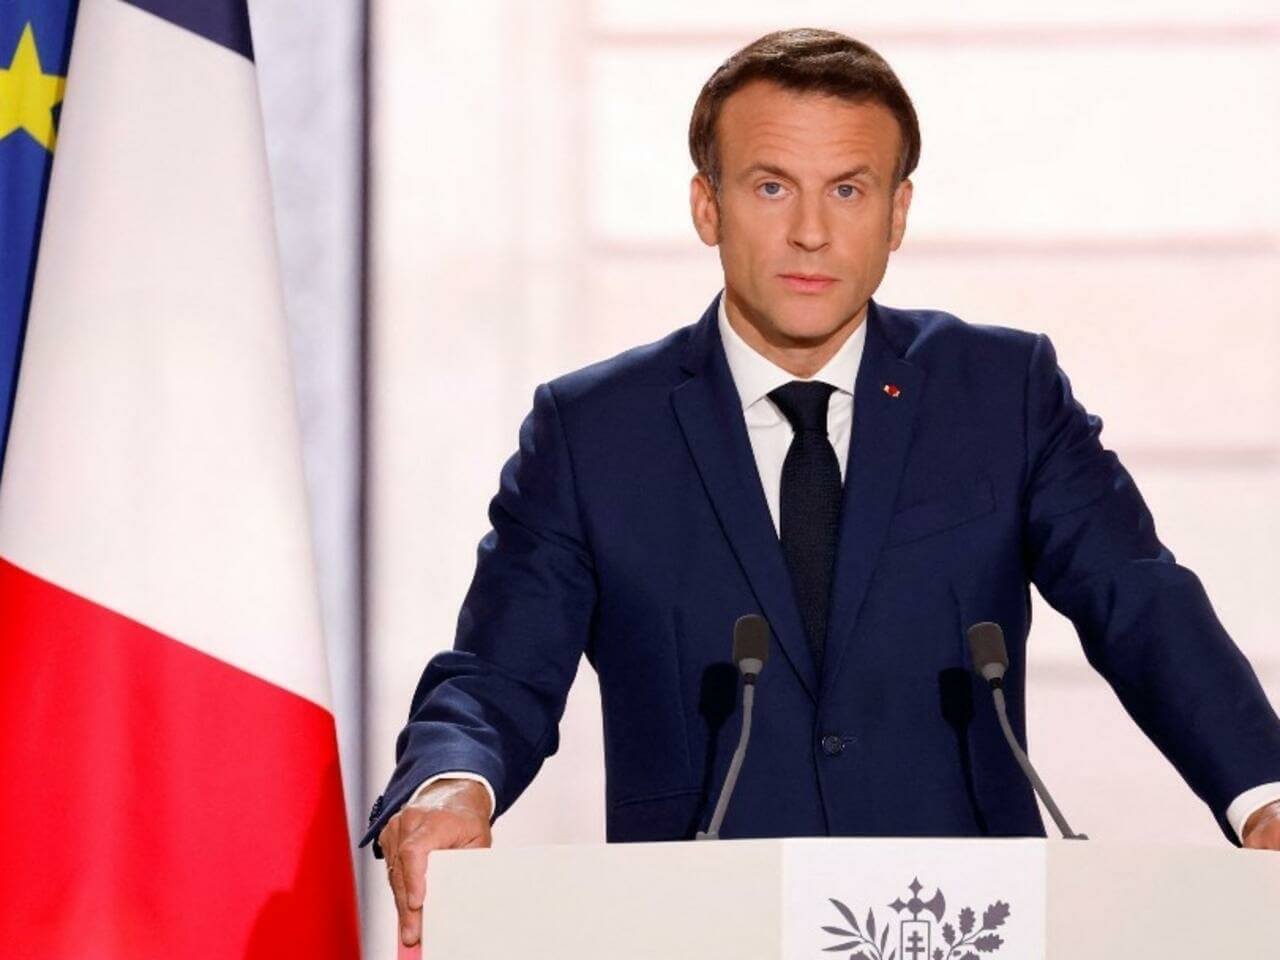 Macron Reminds Albanese of “Deep Breach of Trust” Over AUKUS in First Conversation